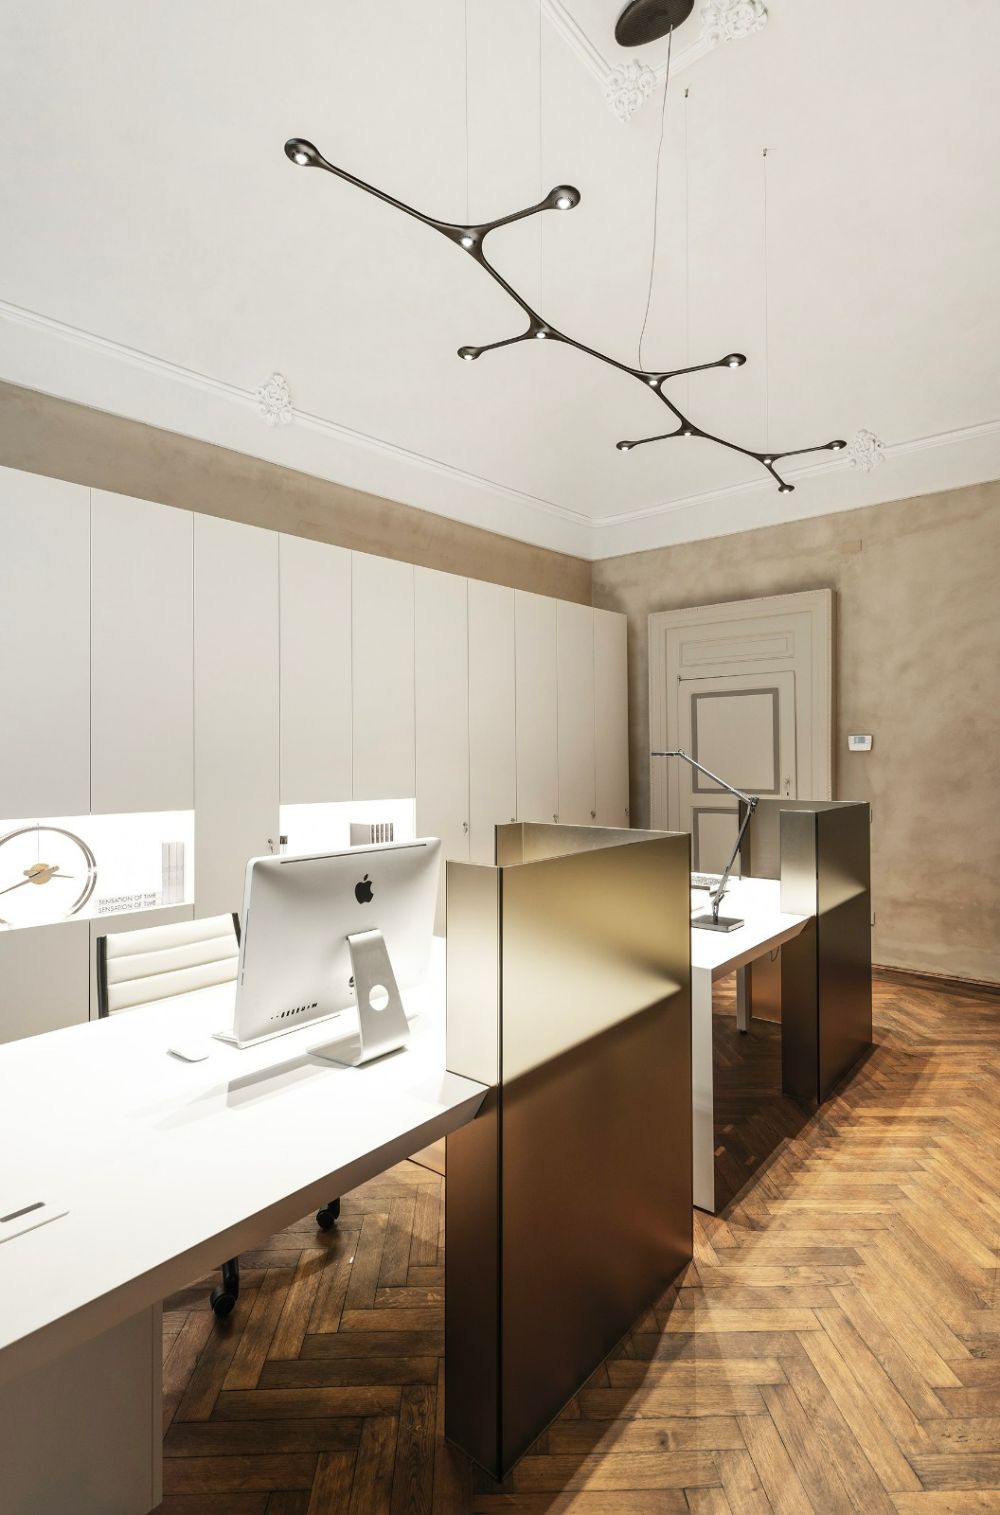 Office In Piacenza Italy Featuring Carbon Light By Tokio Project Designers Guglielmetti Interior 10, Design Authority